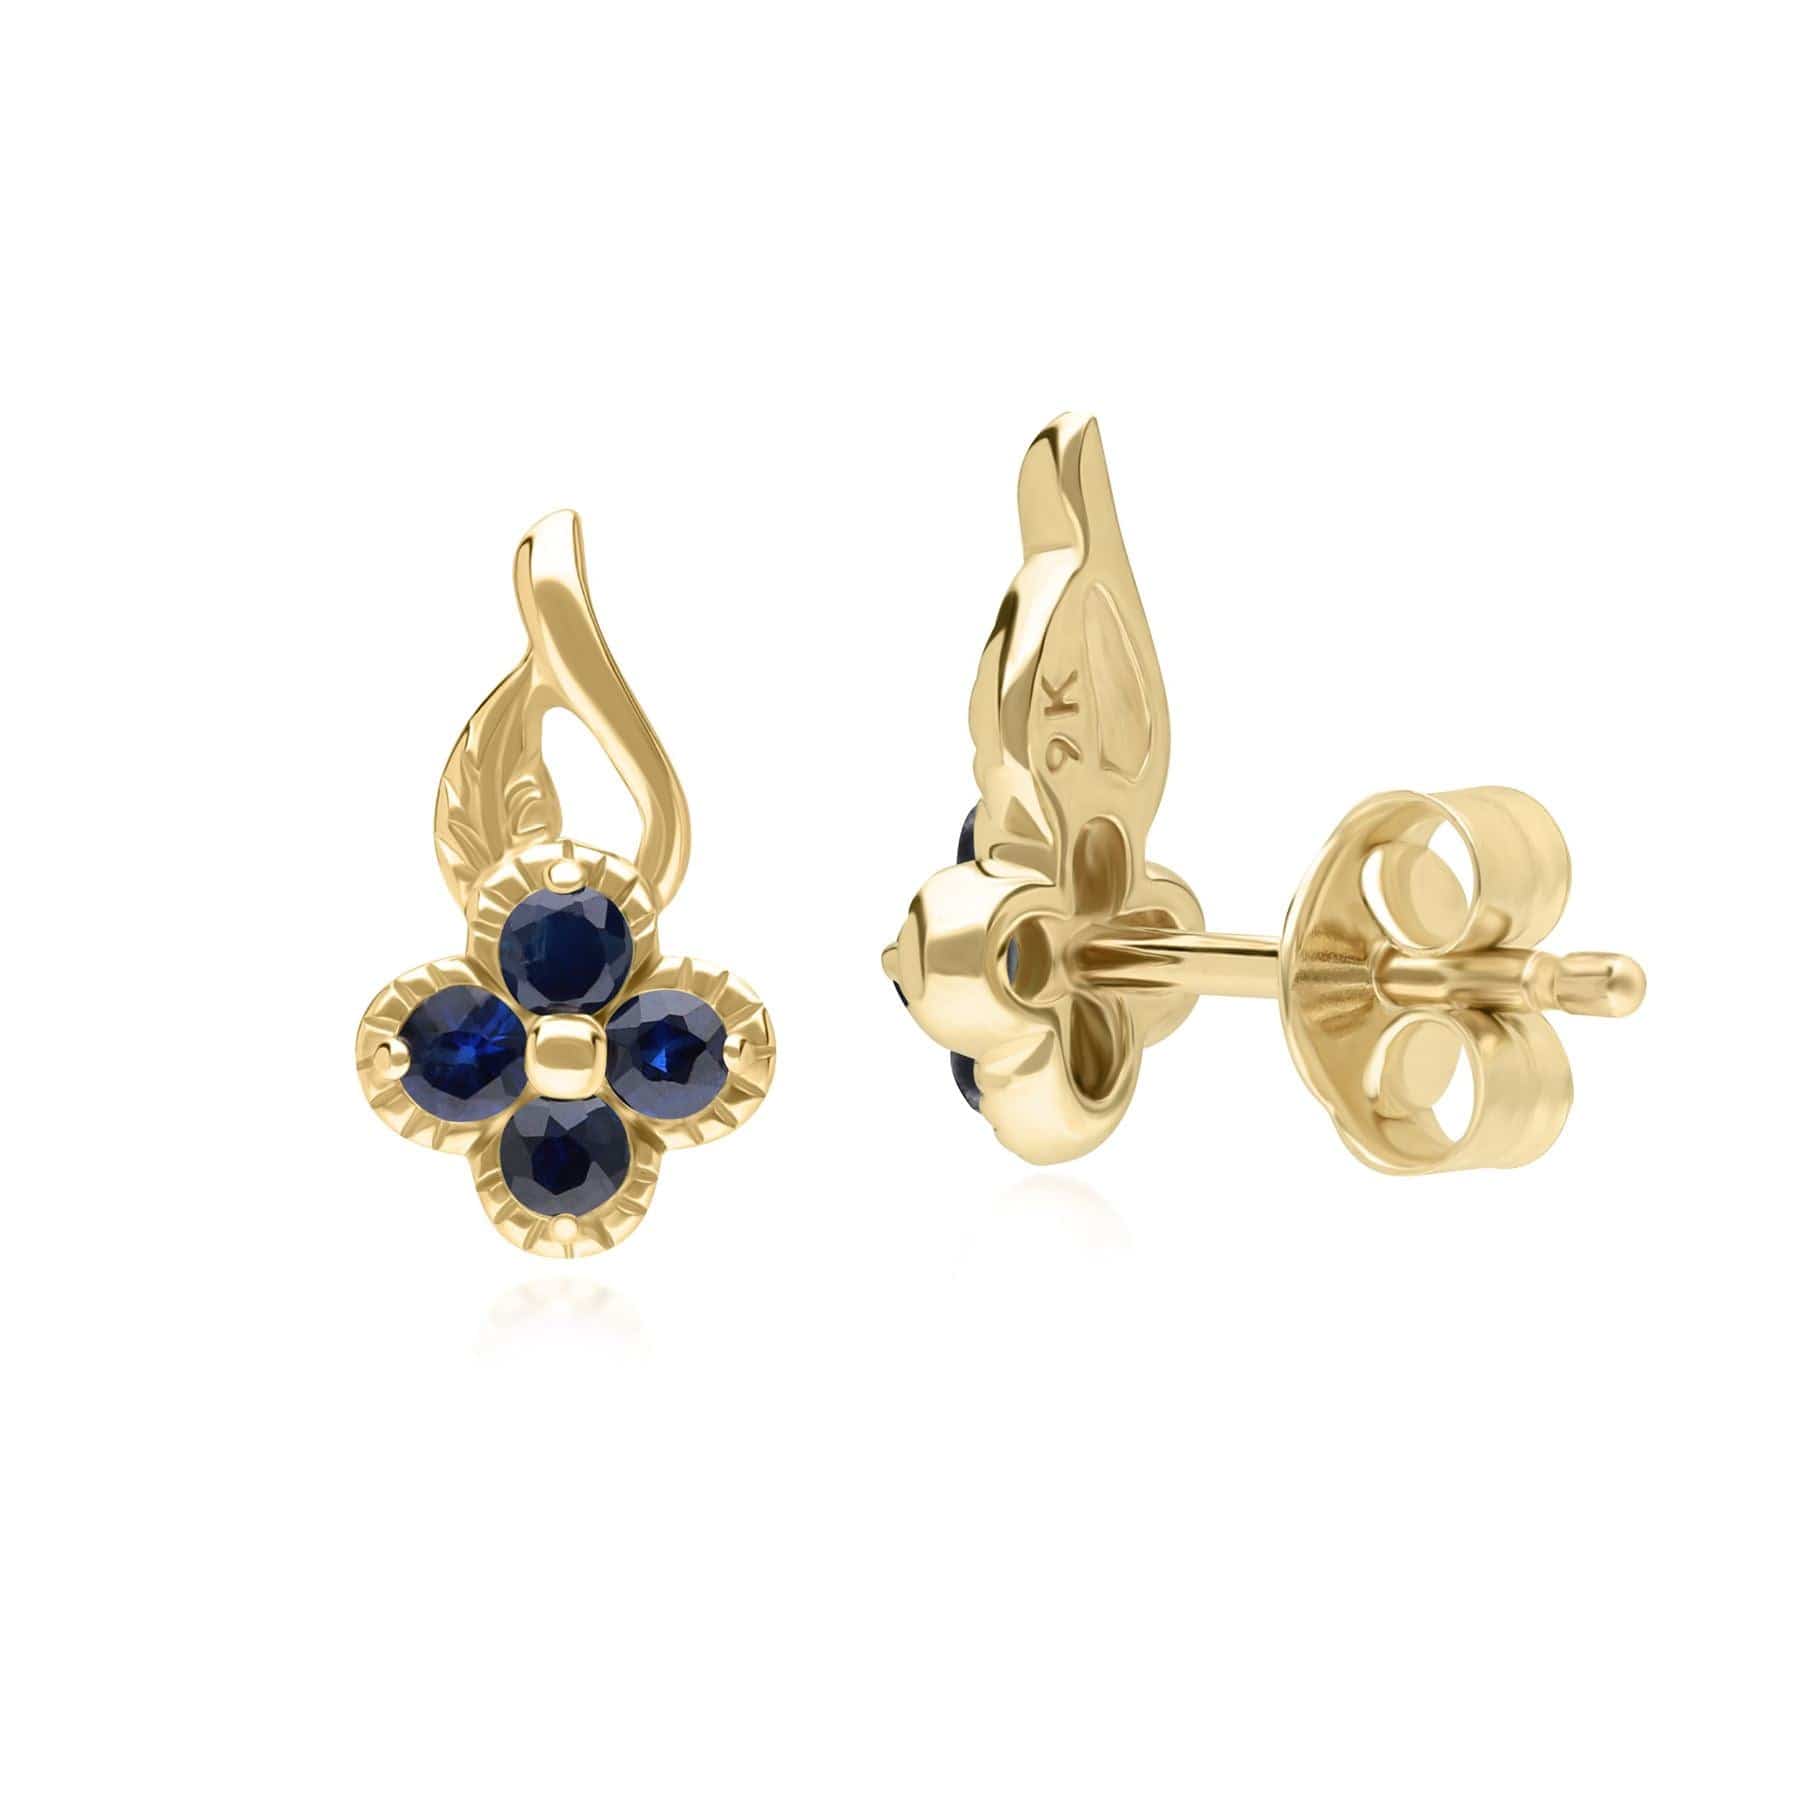 Floral Round Sapphire Stud Earrings in 9ct Yellow Gold - Gemondo